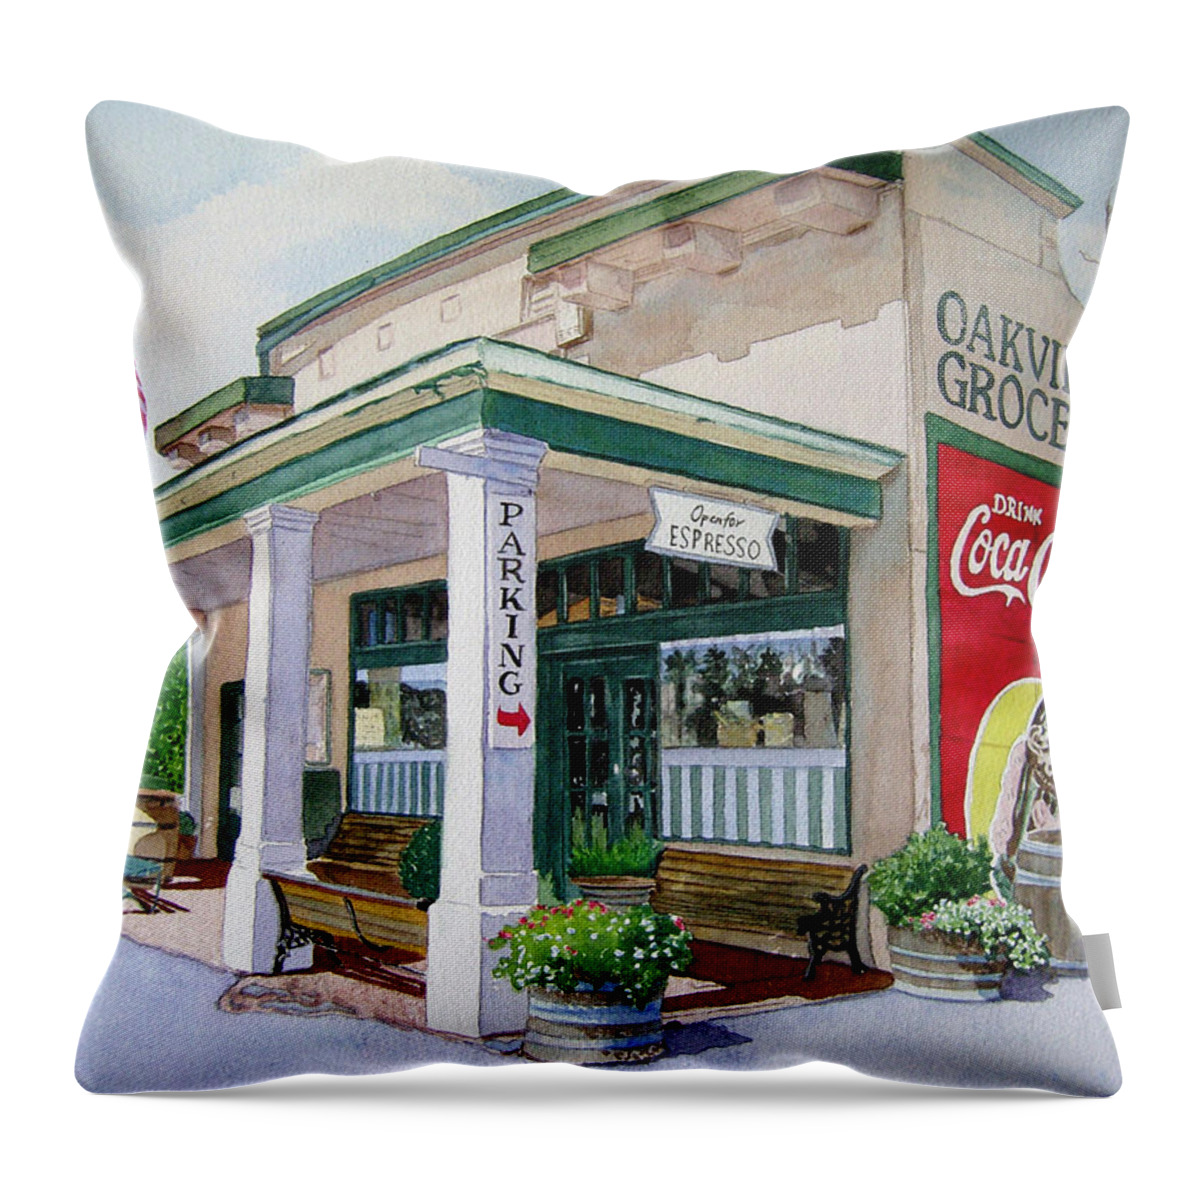 Cityscape Throw Pillow featuring the painting Oakville Grocery by Gail Chandler